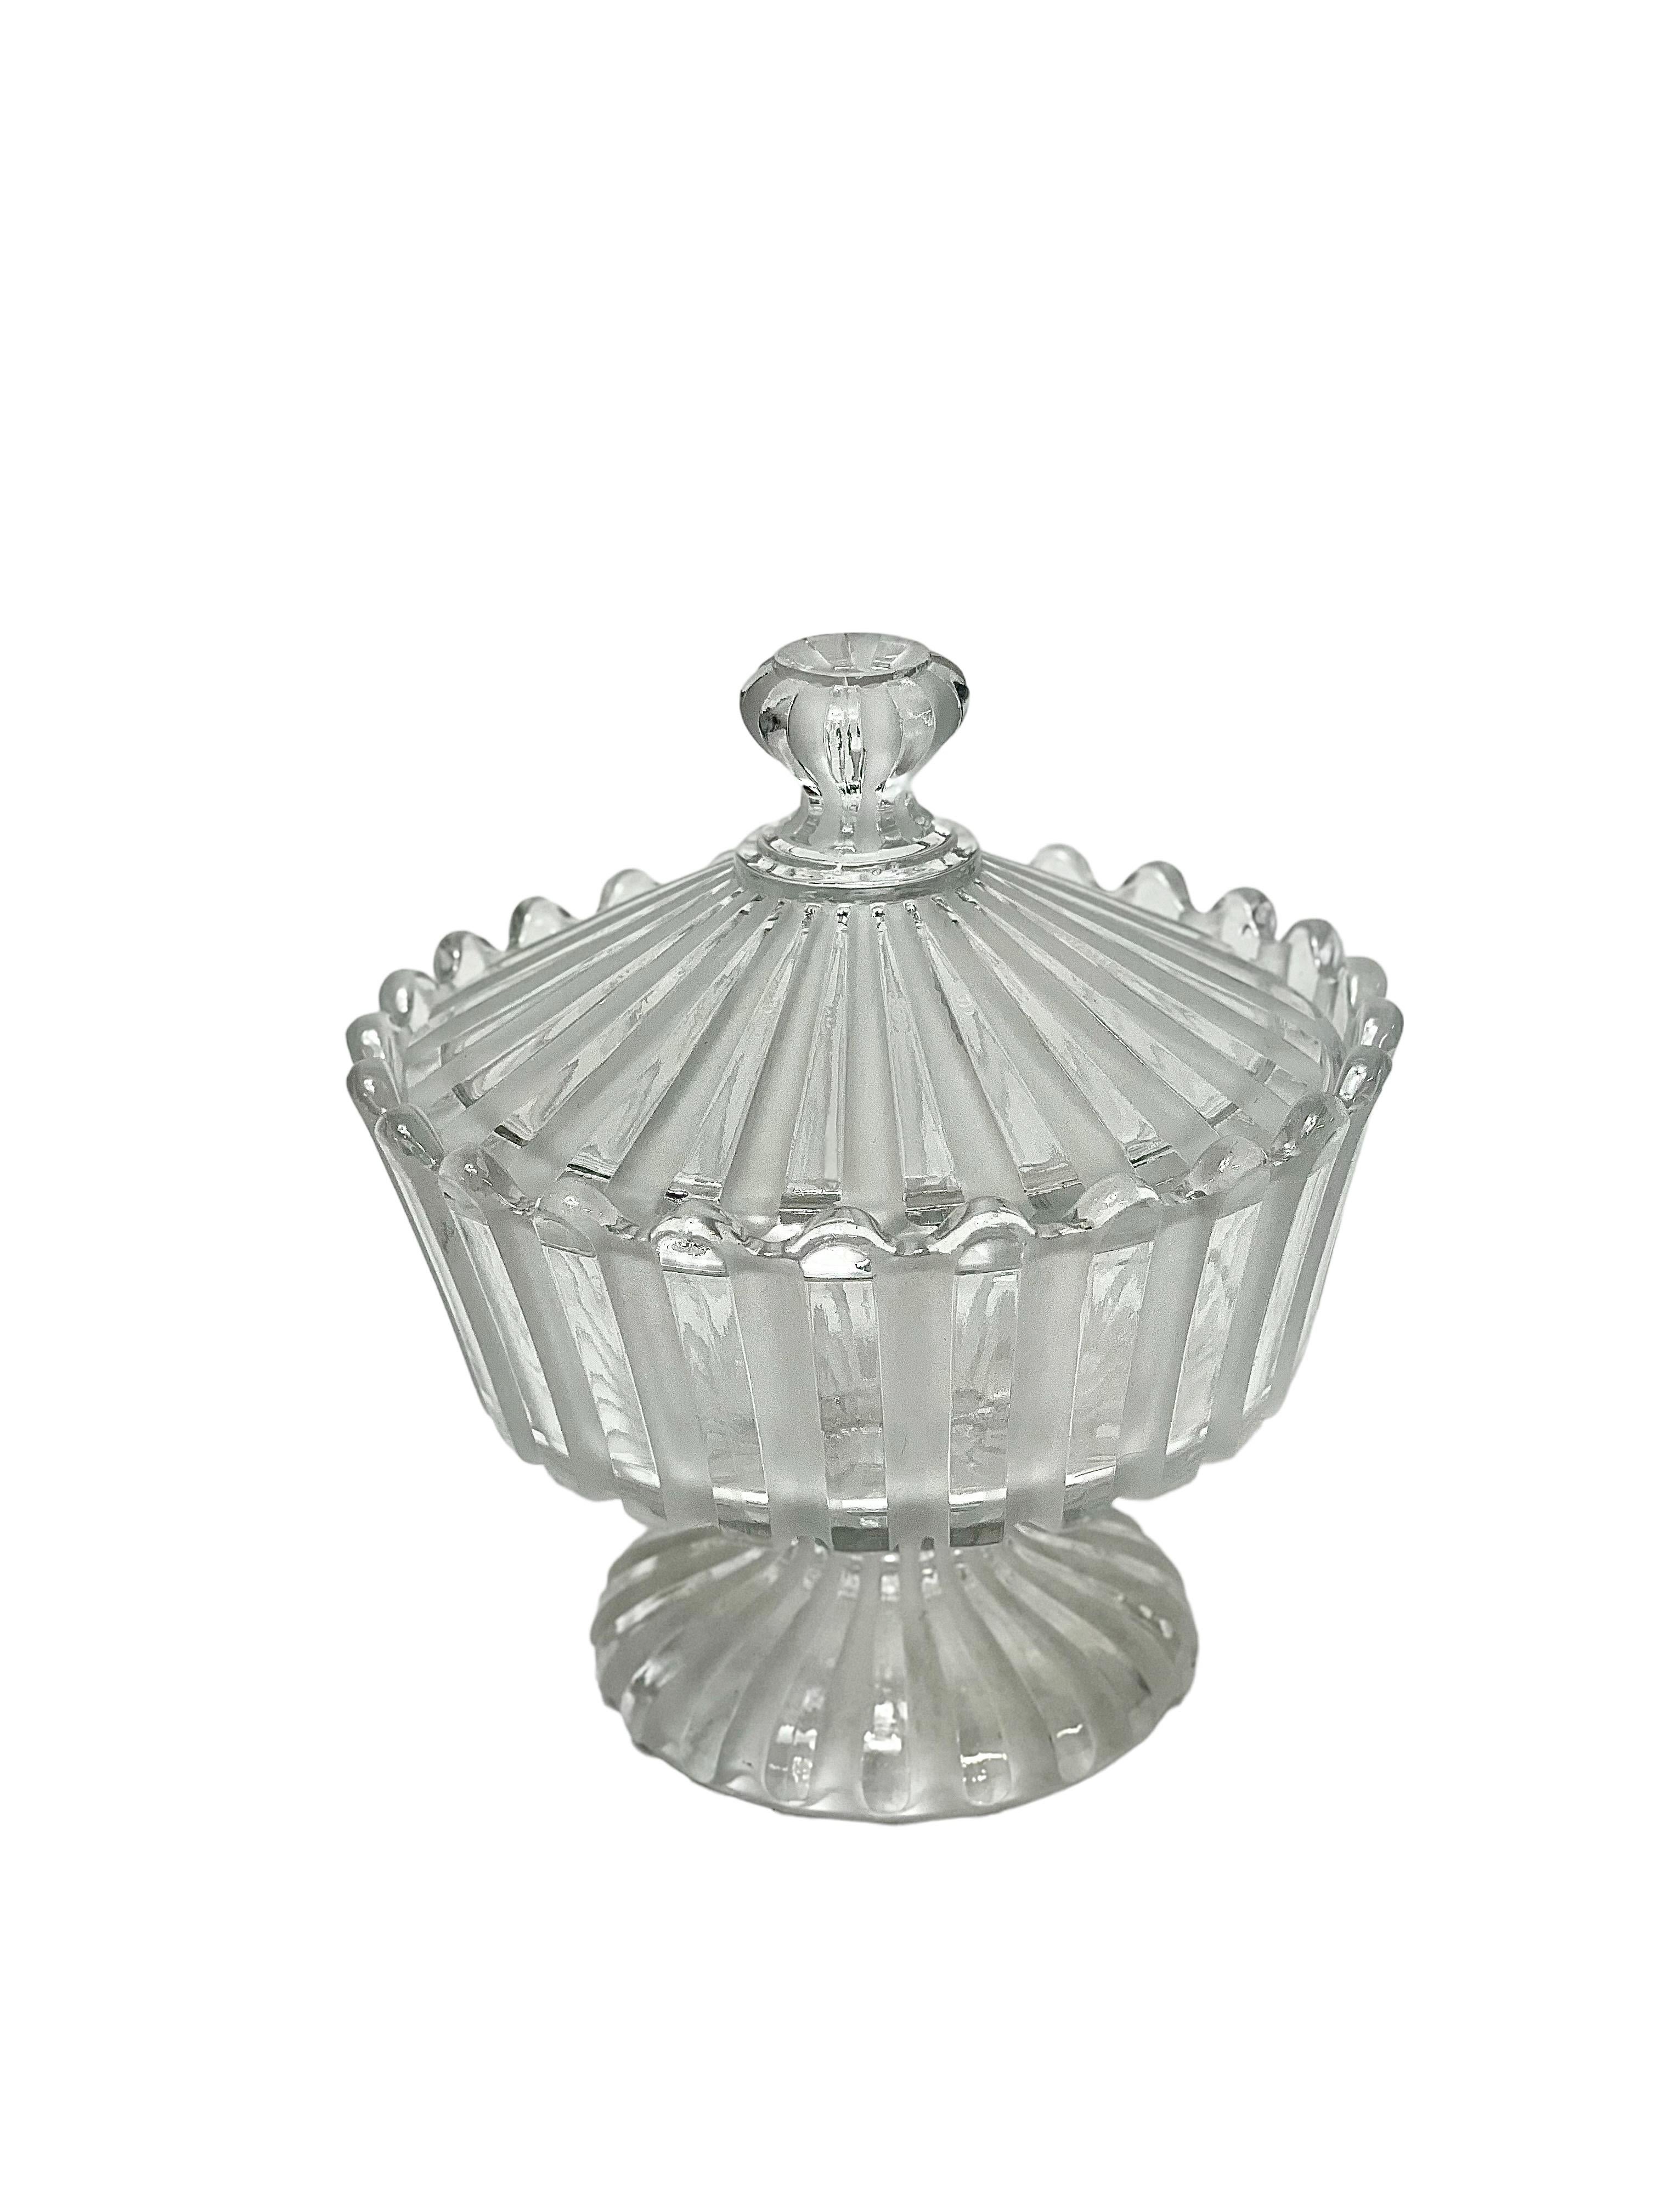 French Pair of Antique Baccarat Crystal Frosted and Clear Lidded Bonbonnières, 19th C.